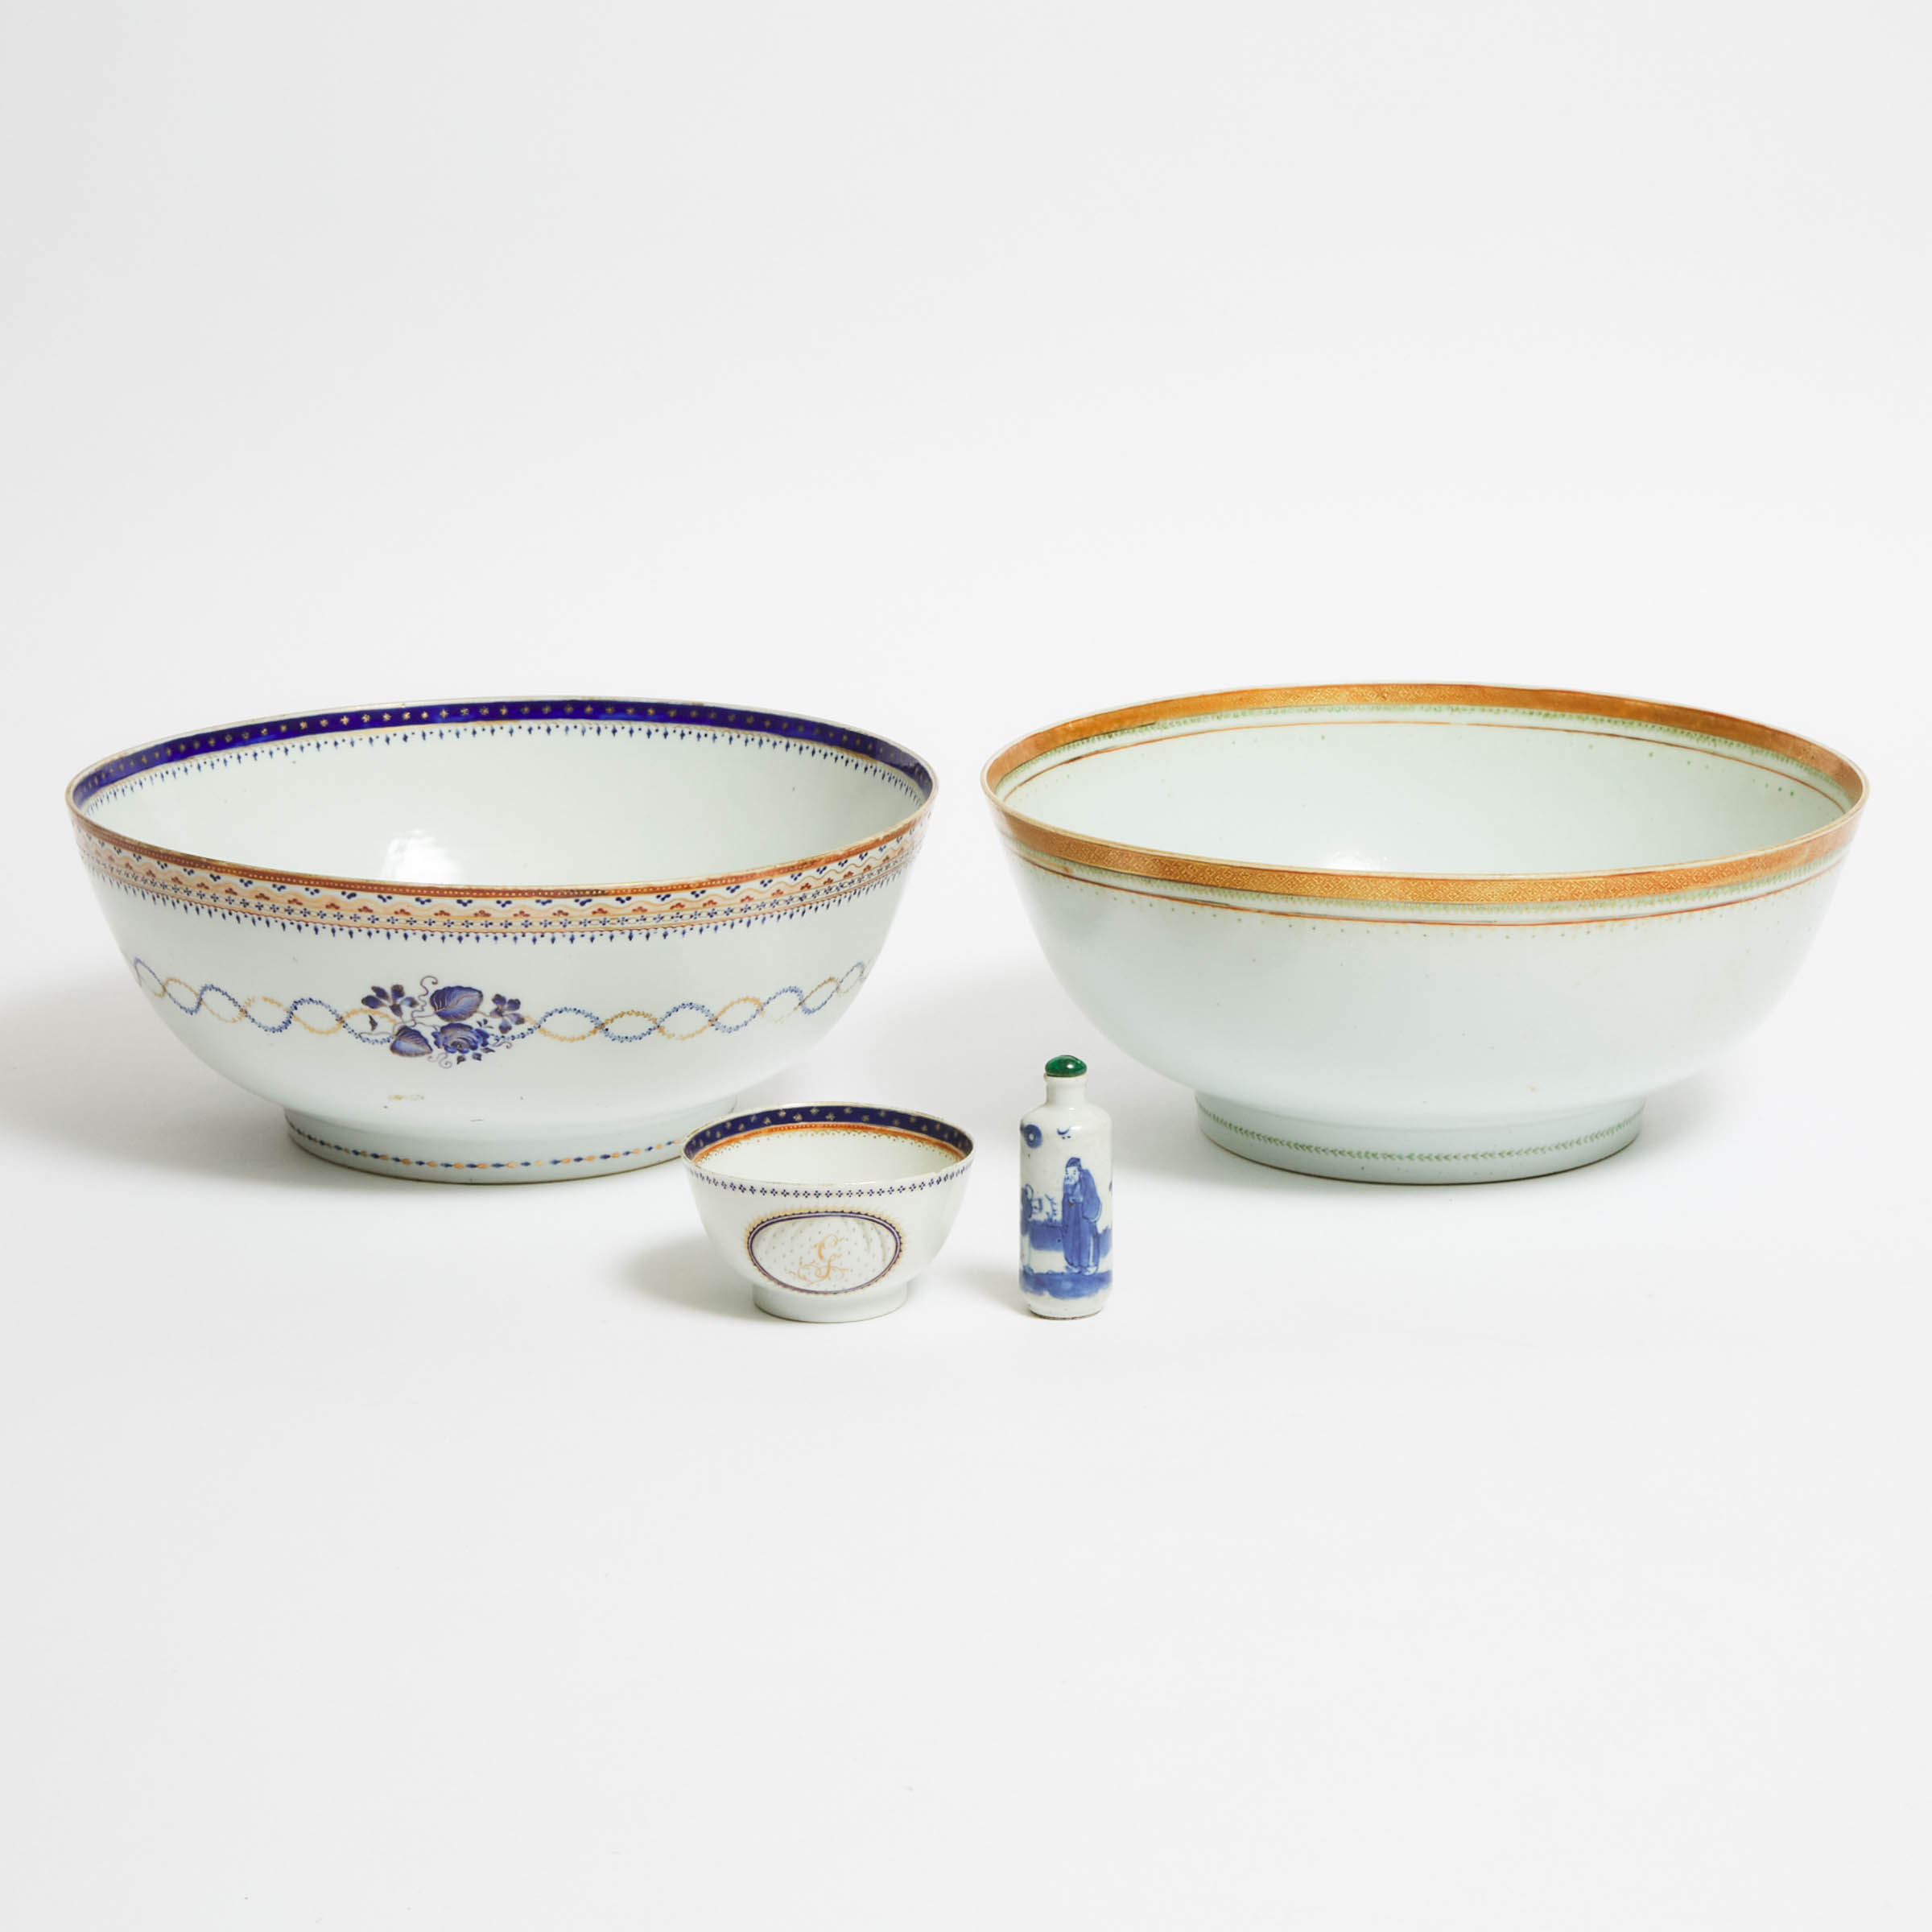 Two Chinese Export Porcelain Punch